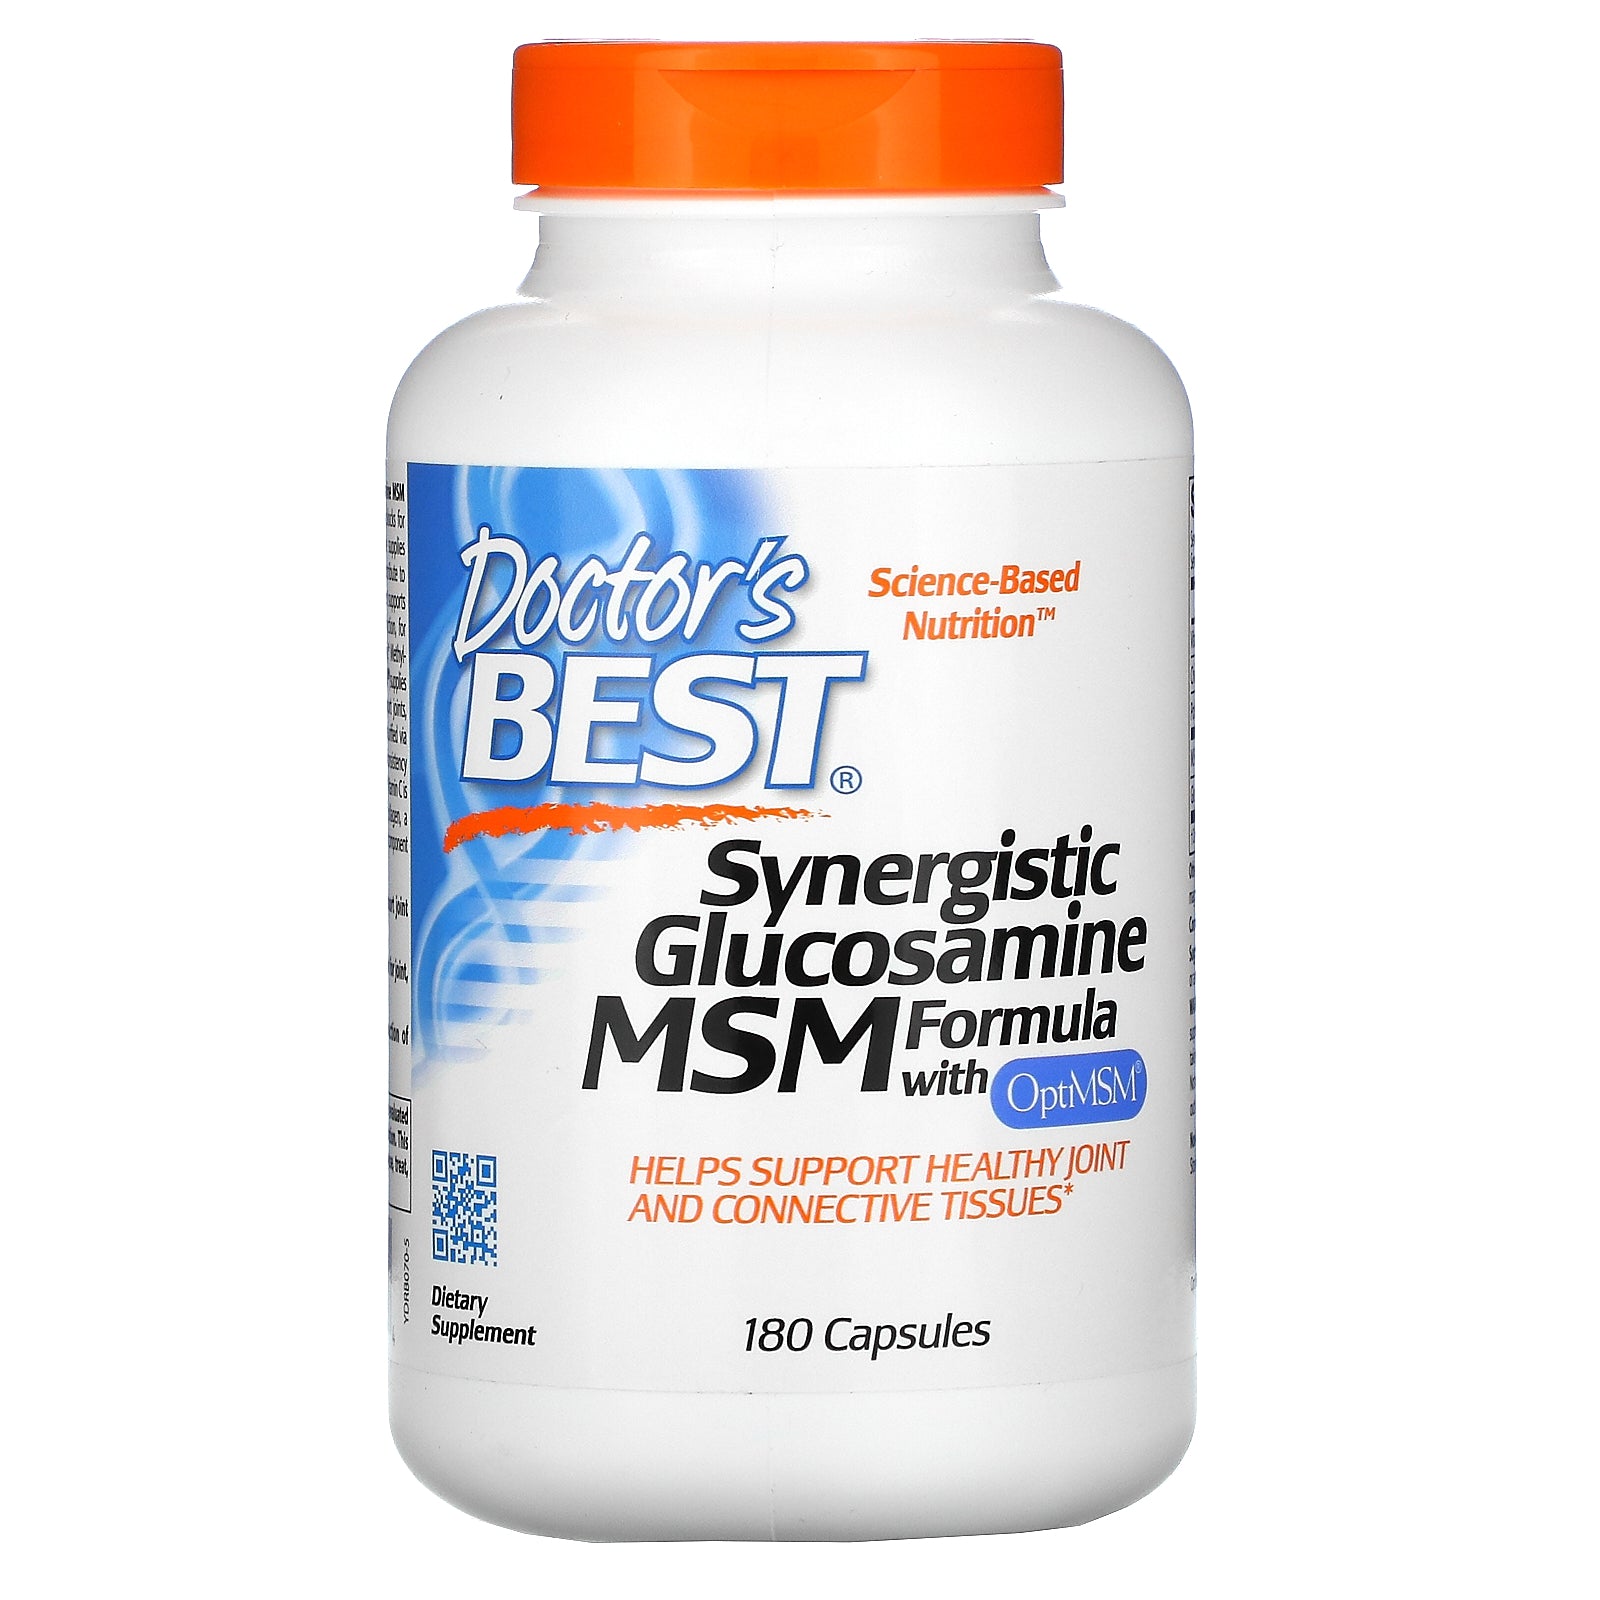 Doctor's Best, Synergistic Glucosamine MSM Formula with OptiMSM